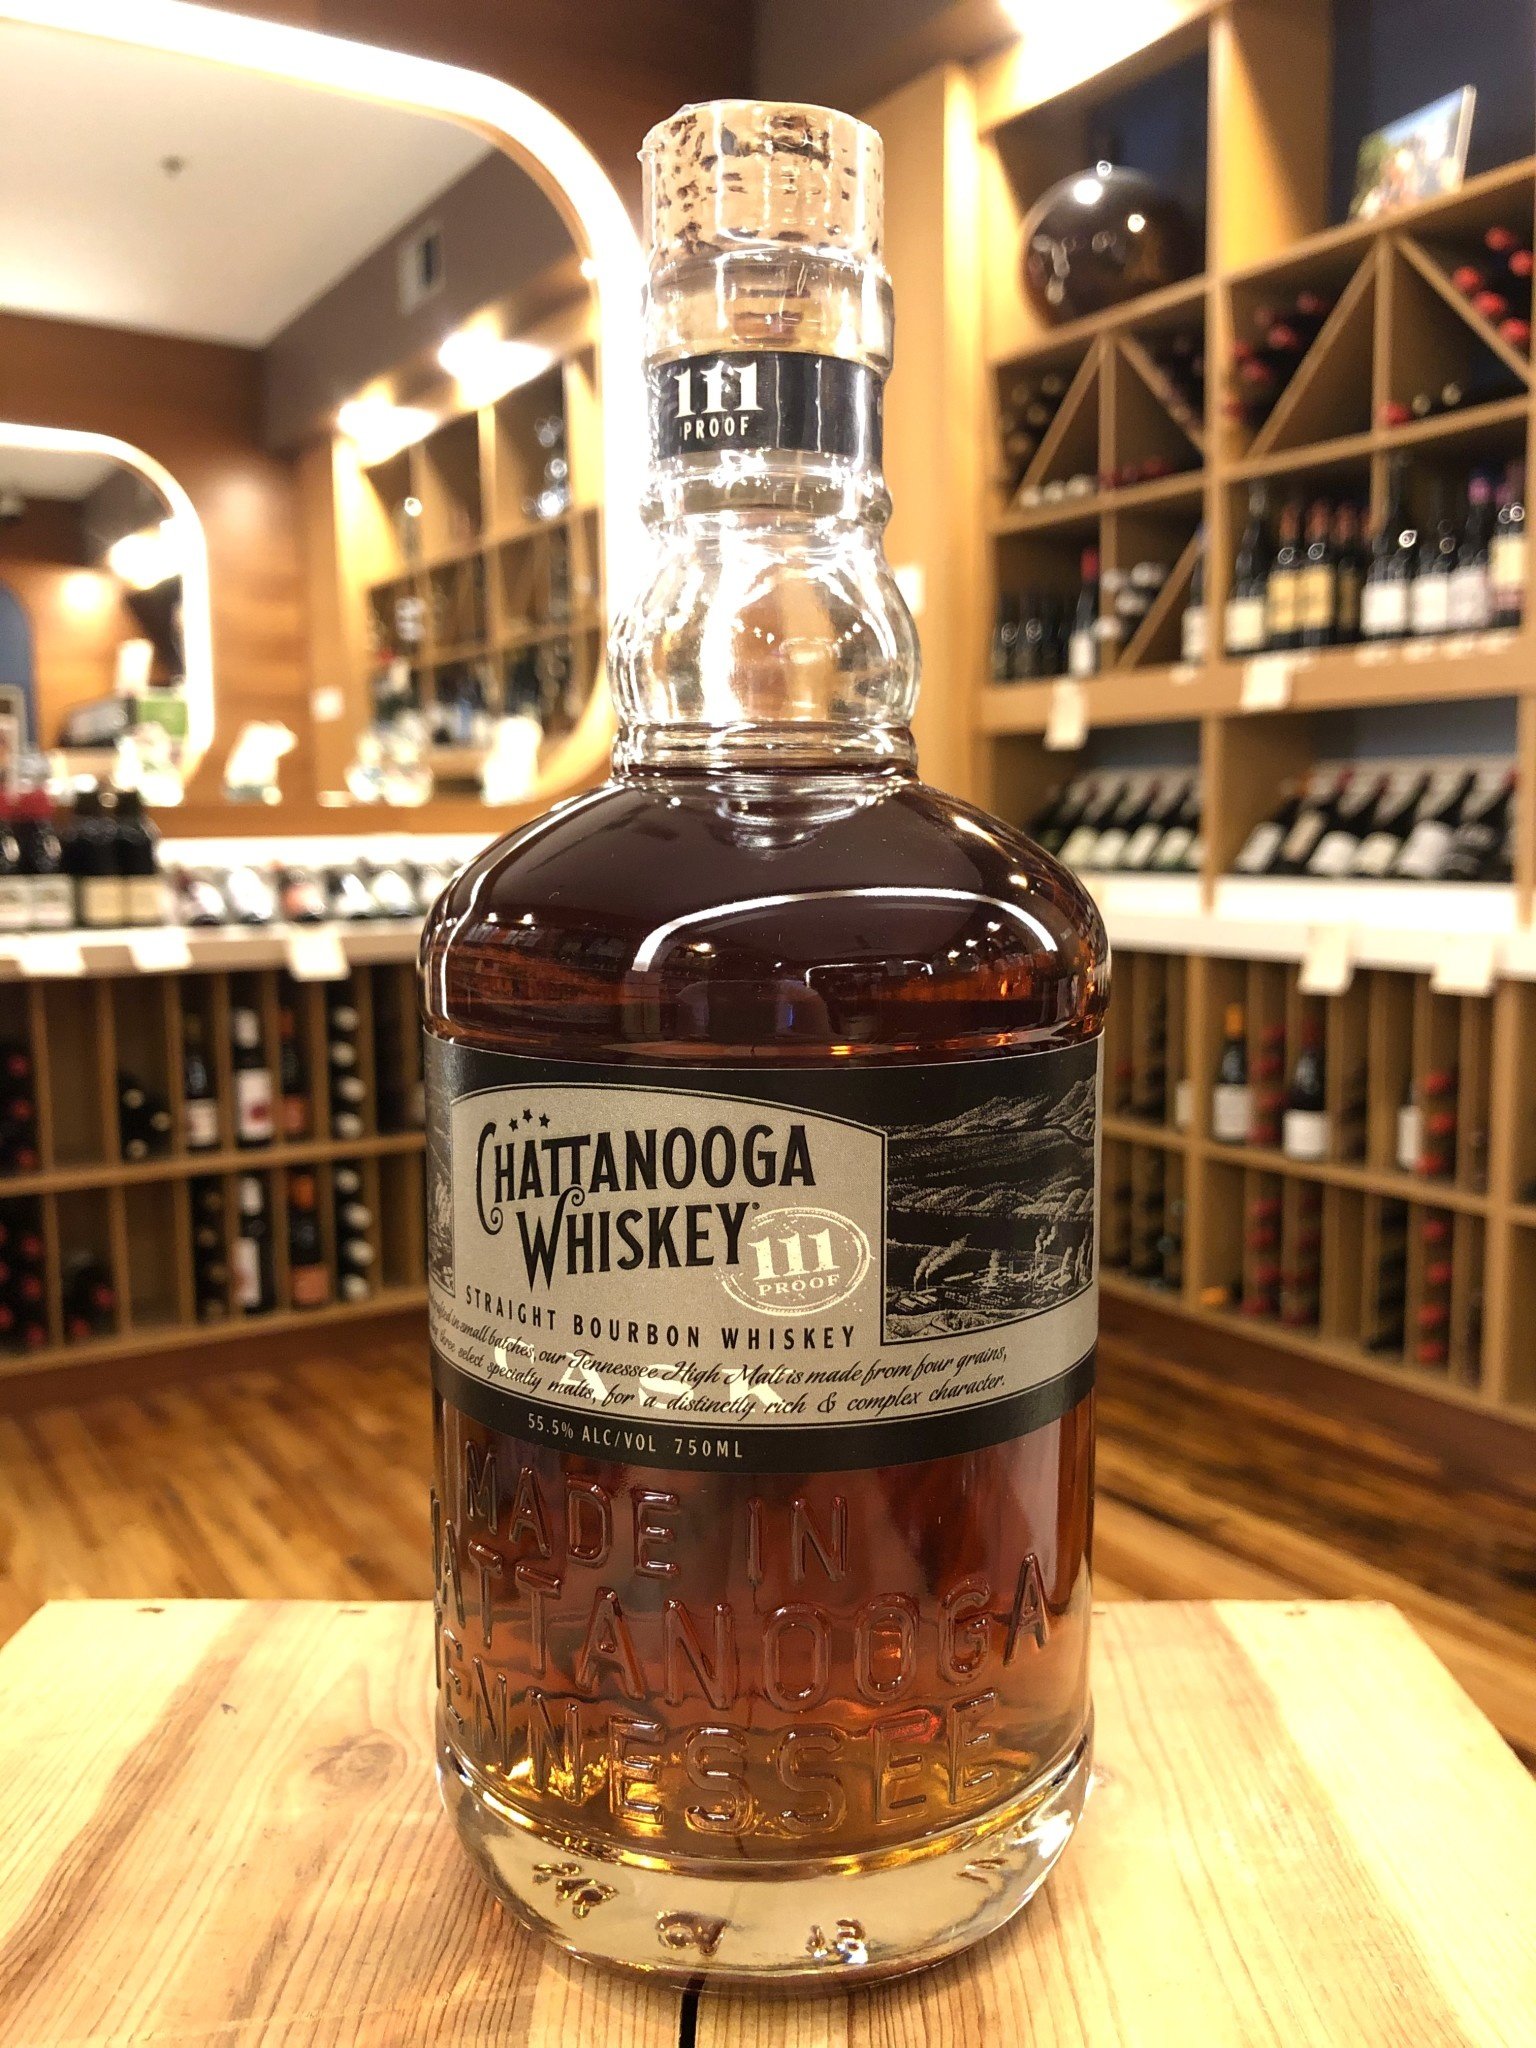 who owns chattanooga whiskey